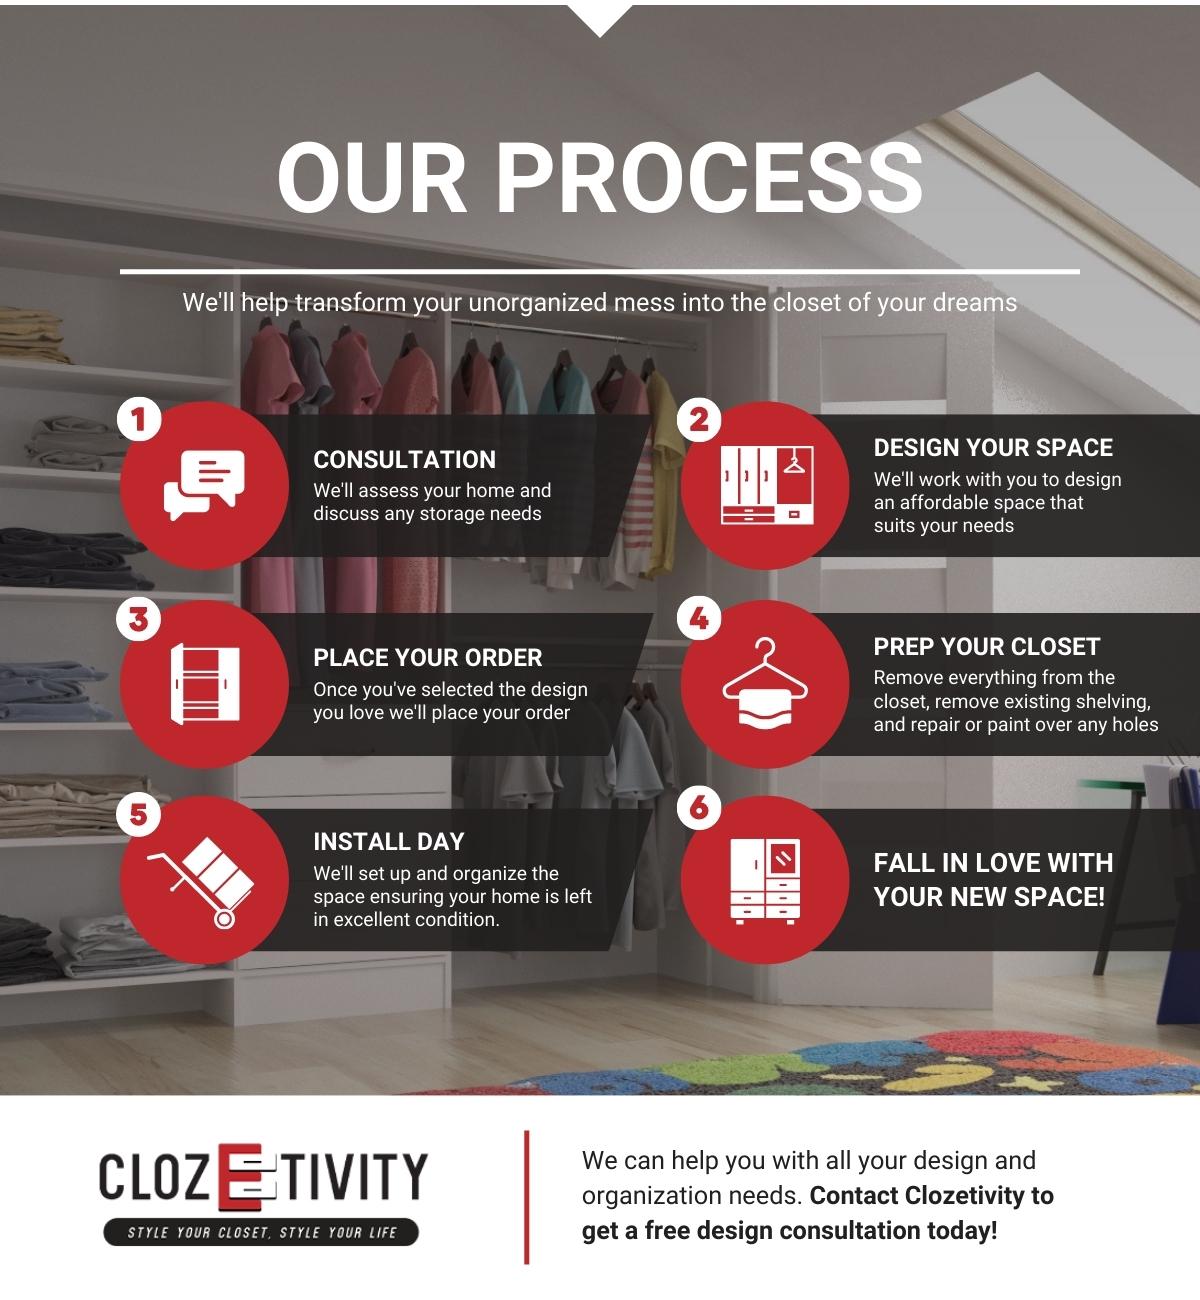 M36817 - Clozetivity Central Texas_Infographic - Our Process